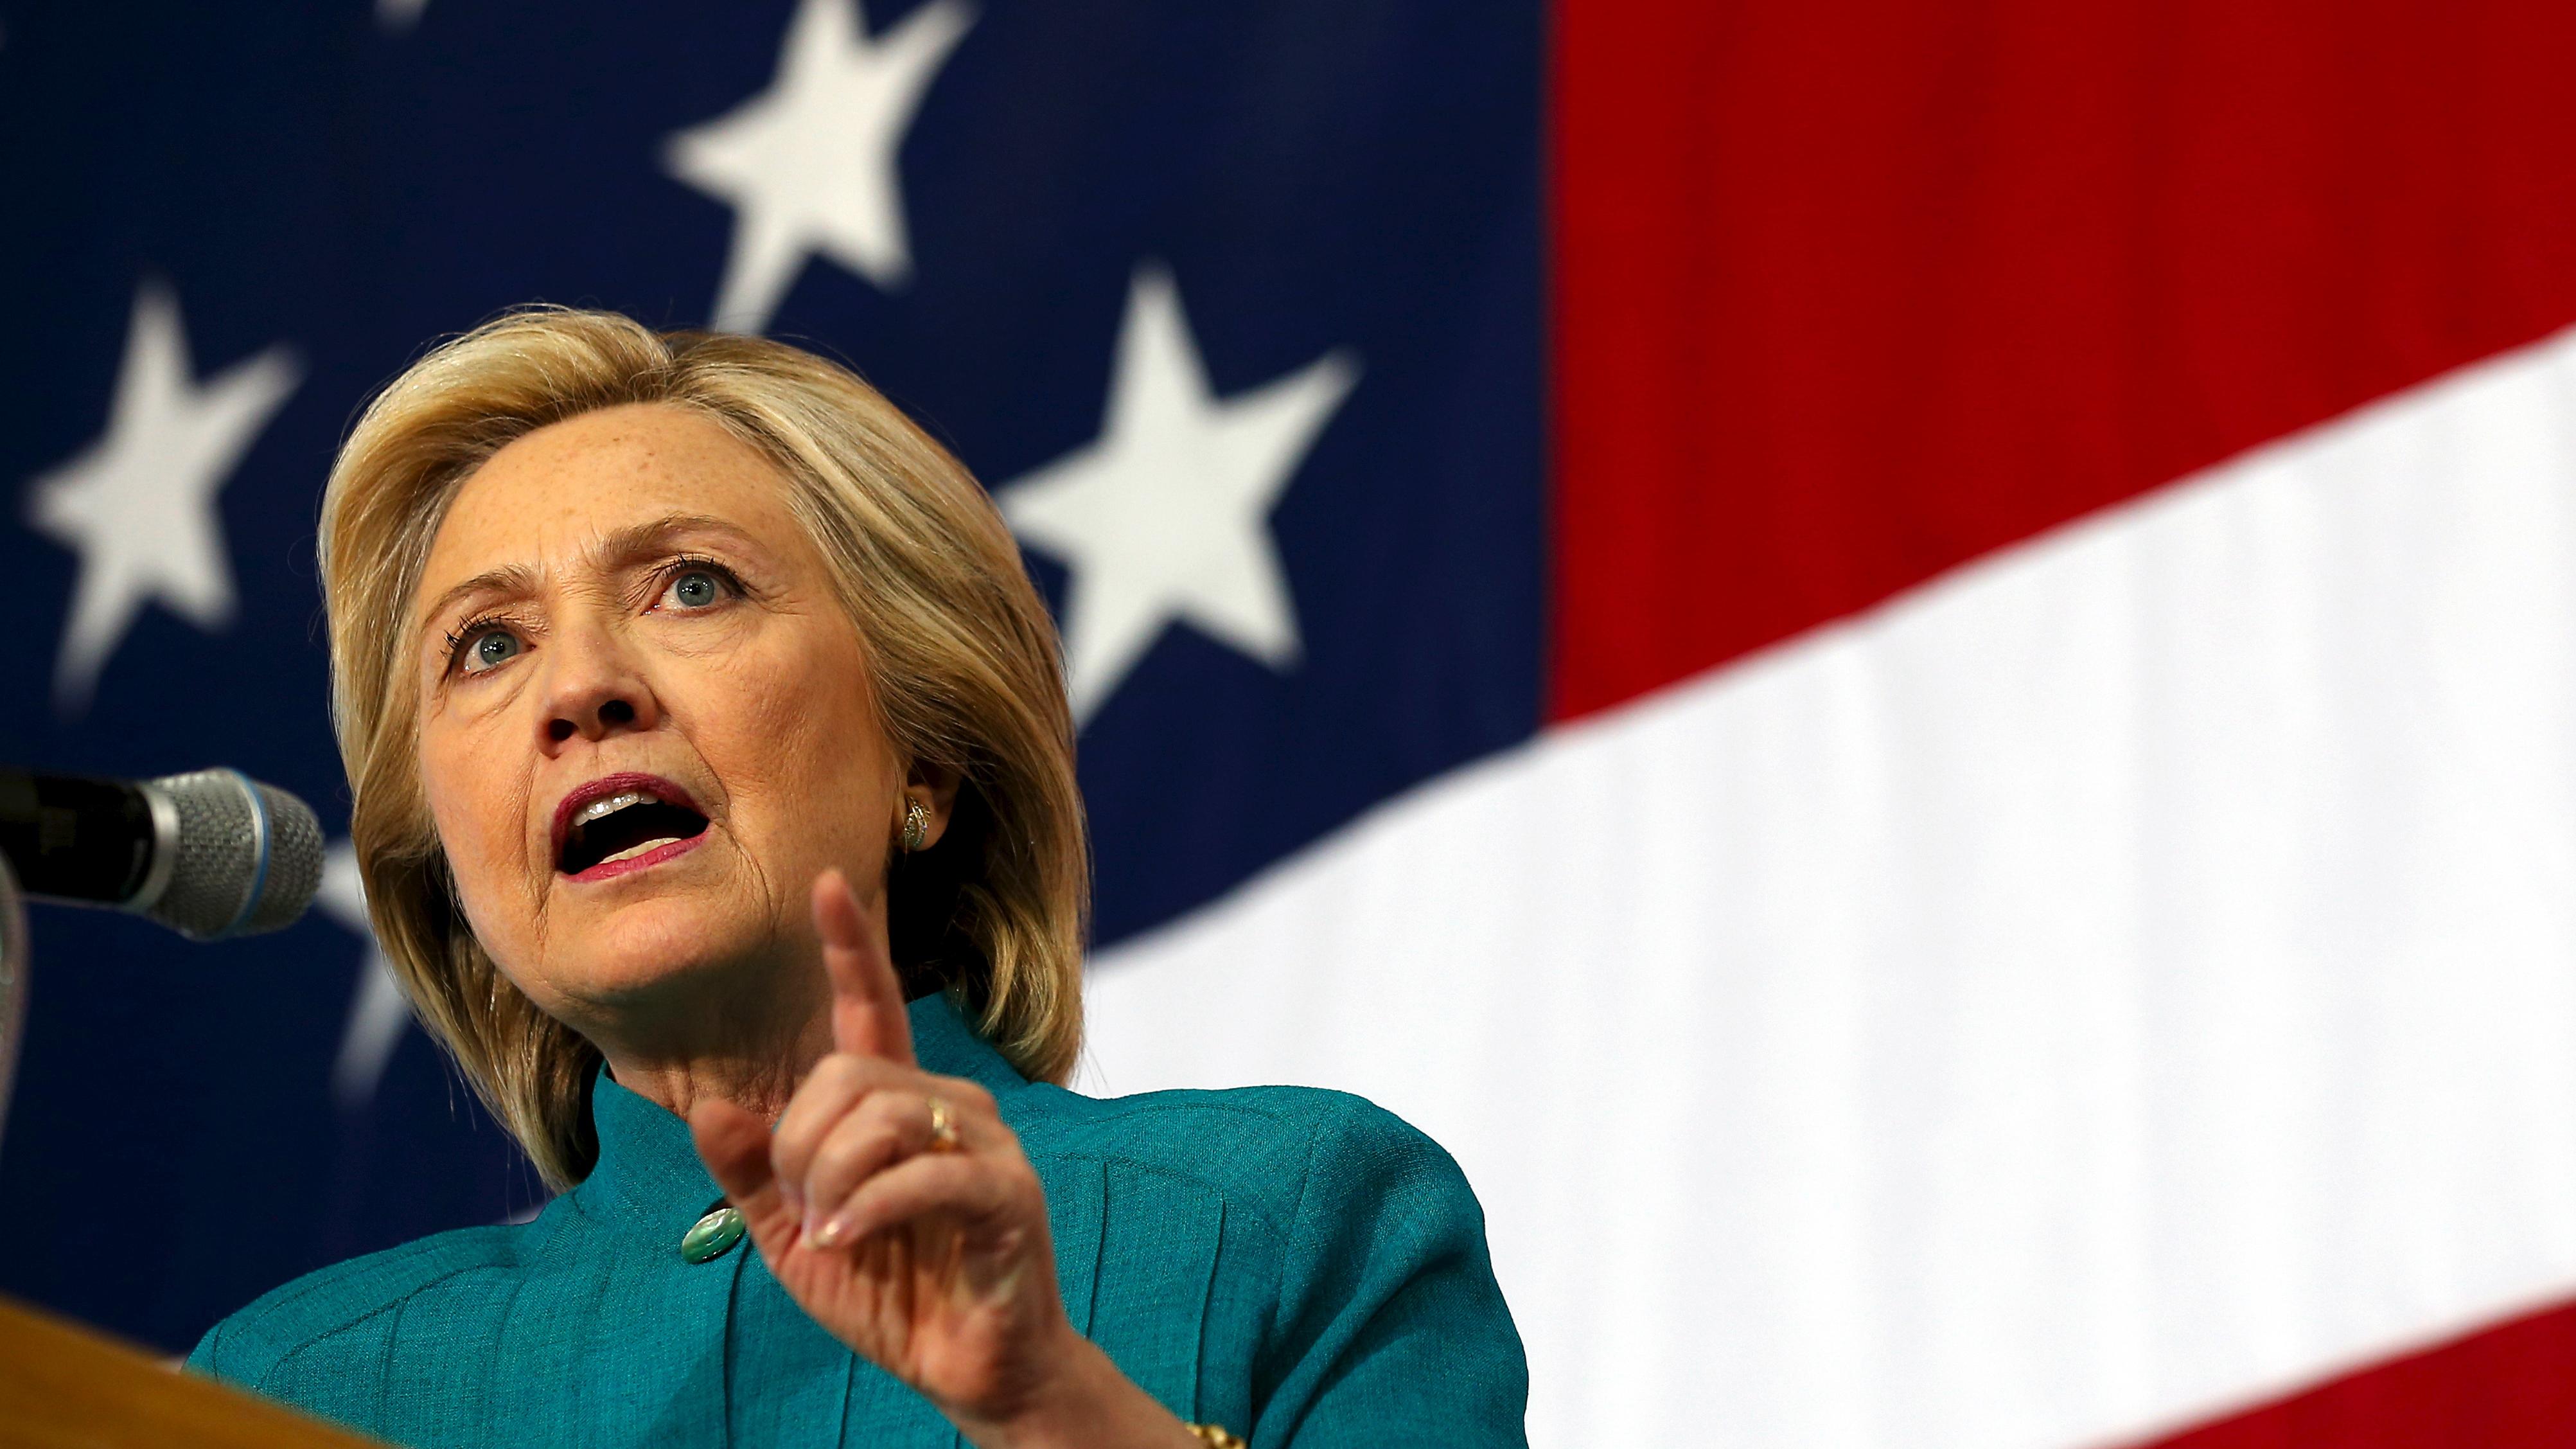 Hillary Clinton has been urged to oppose the TPP by her progressive rival Bernie Sanders.